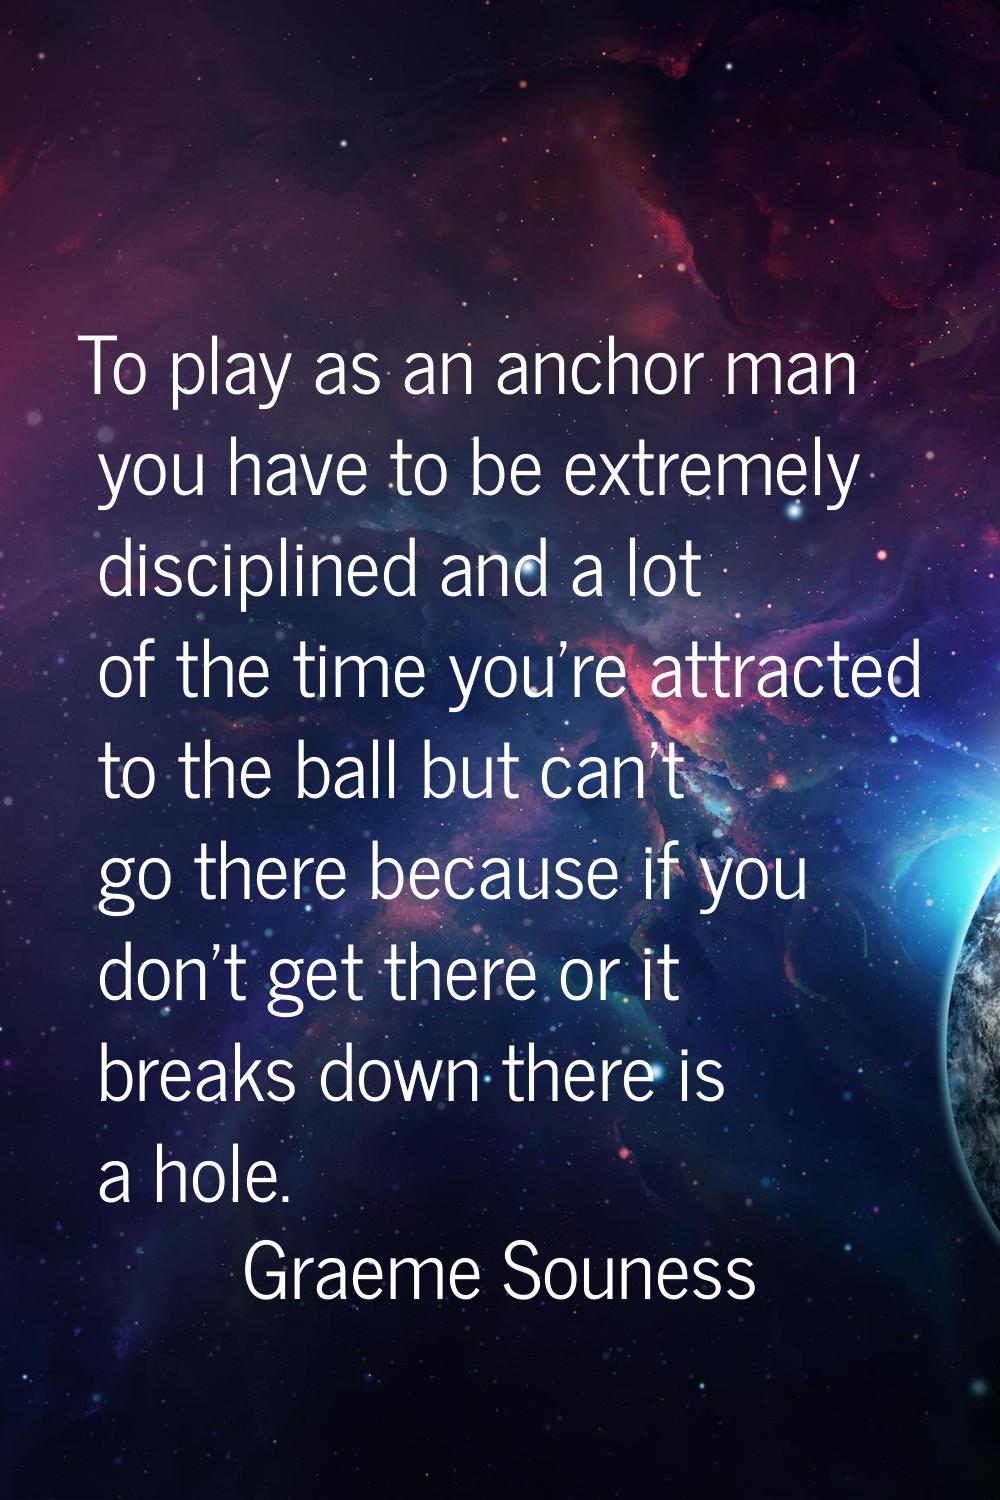 To play as an anchor man you have to be extremely disciplined and a lot of the time you're attracte